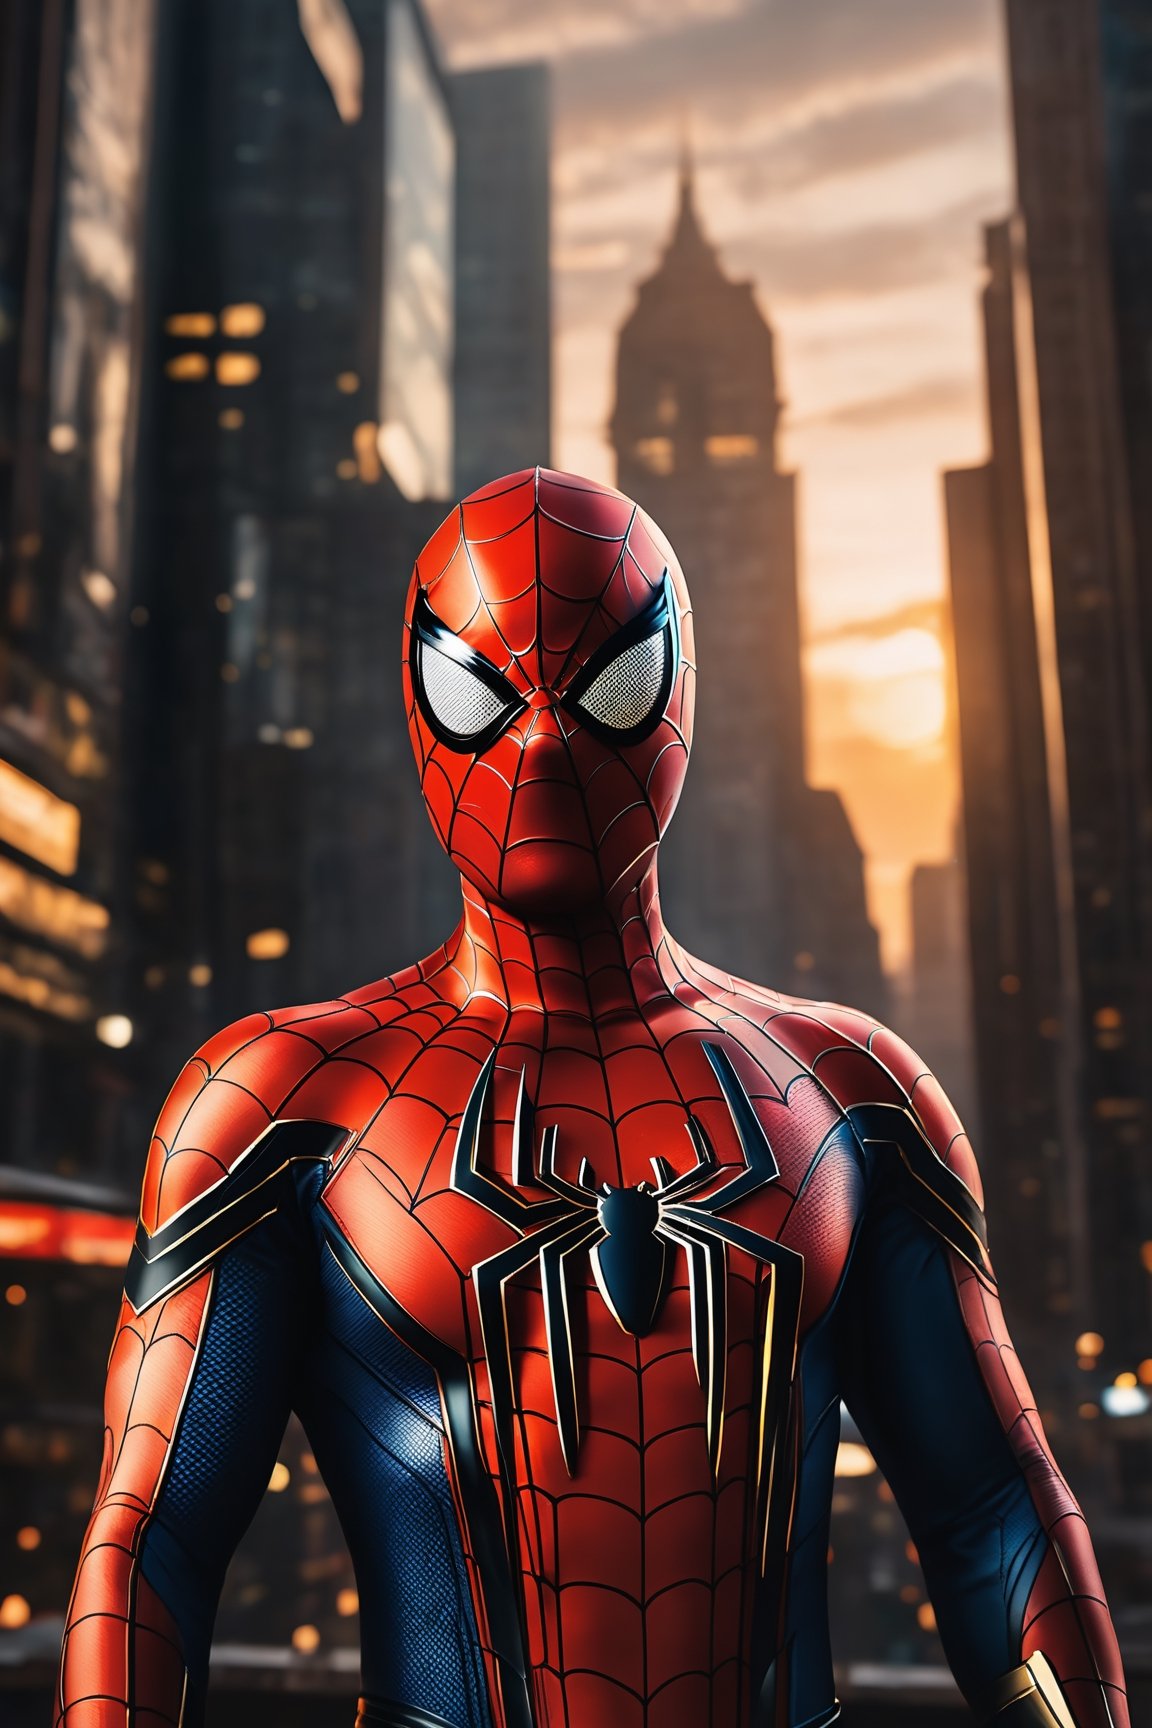 A breathtaking 8K photorealistic concept art masterpiece, (Spiderman adorned in a stunning white and gold armor-style suit, unmasked, with a white cape billowing gracefully:1.3), Set against the backdrop of a highly detailed night cityscape, captured with perfect composition and sharp focus, (A cinematic vision of artistry:1.3), Bathed in soft, natural volumetric lighting, the chiaroscuro effect enhancing the intricate details of the suit, (A true award-winning photograph:1.3), Created in the style reminiscent of the great masters Raphael, Caravaggio, and modern visionaries like Greg Rutkowski, Beeple, Beksinski, and Giger, (A piece trending on ArtStation for its artistic brilliance:1.3), This oil on canvas marvel is a testament to artistic excellence, showcasing Spiderman as you've never seen him before, (An artistic achievement beyond compare:1.3)